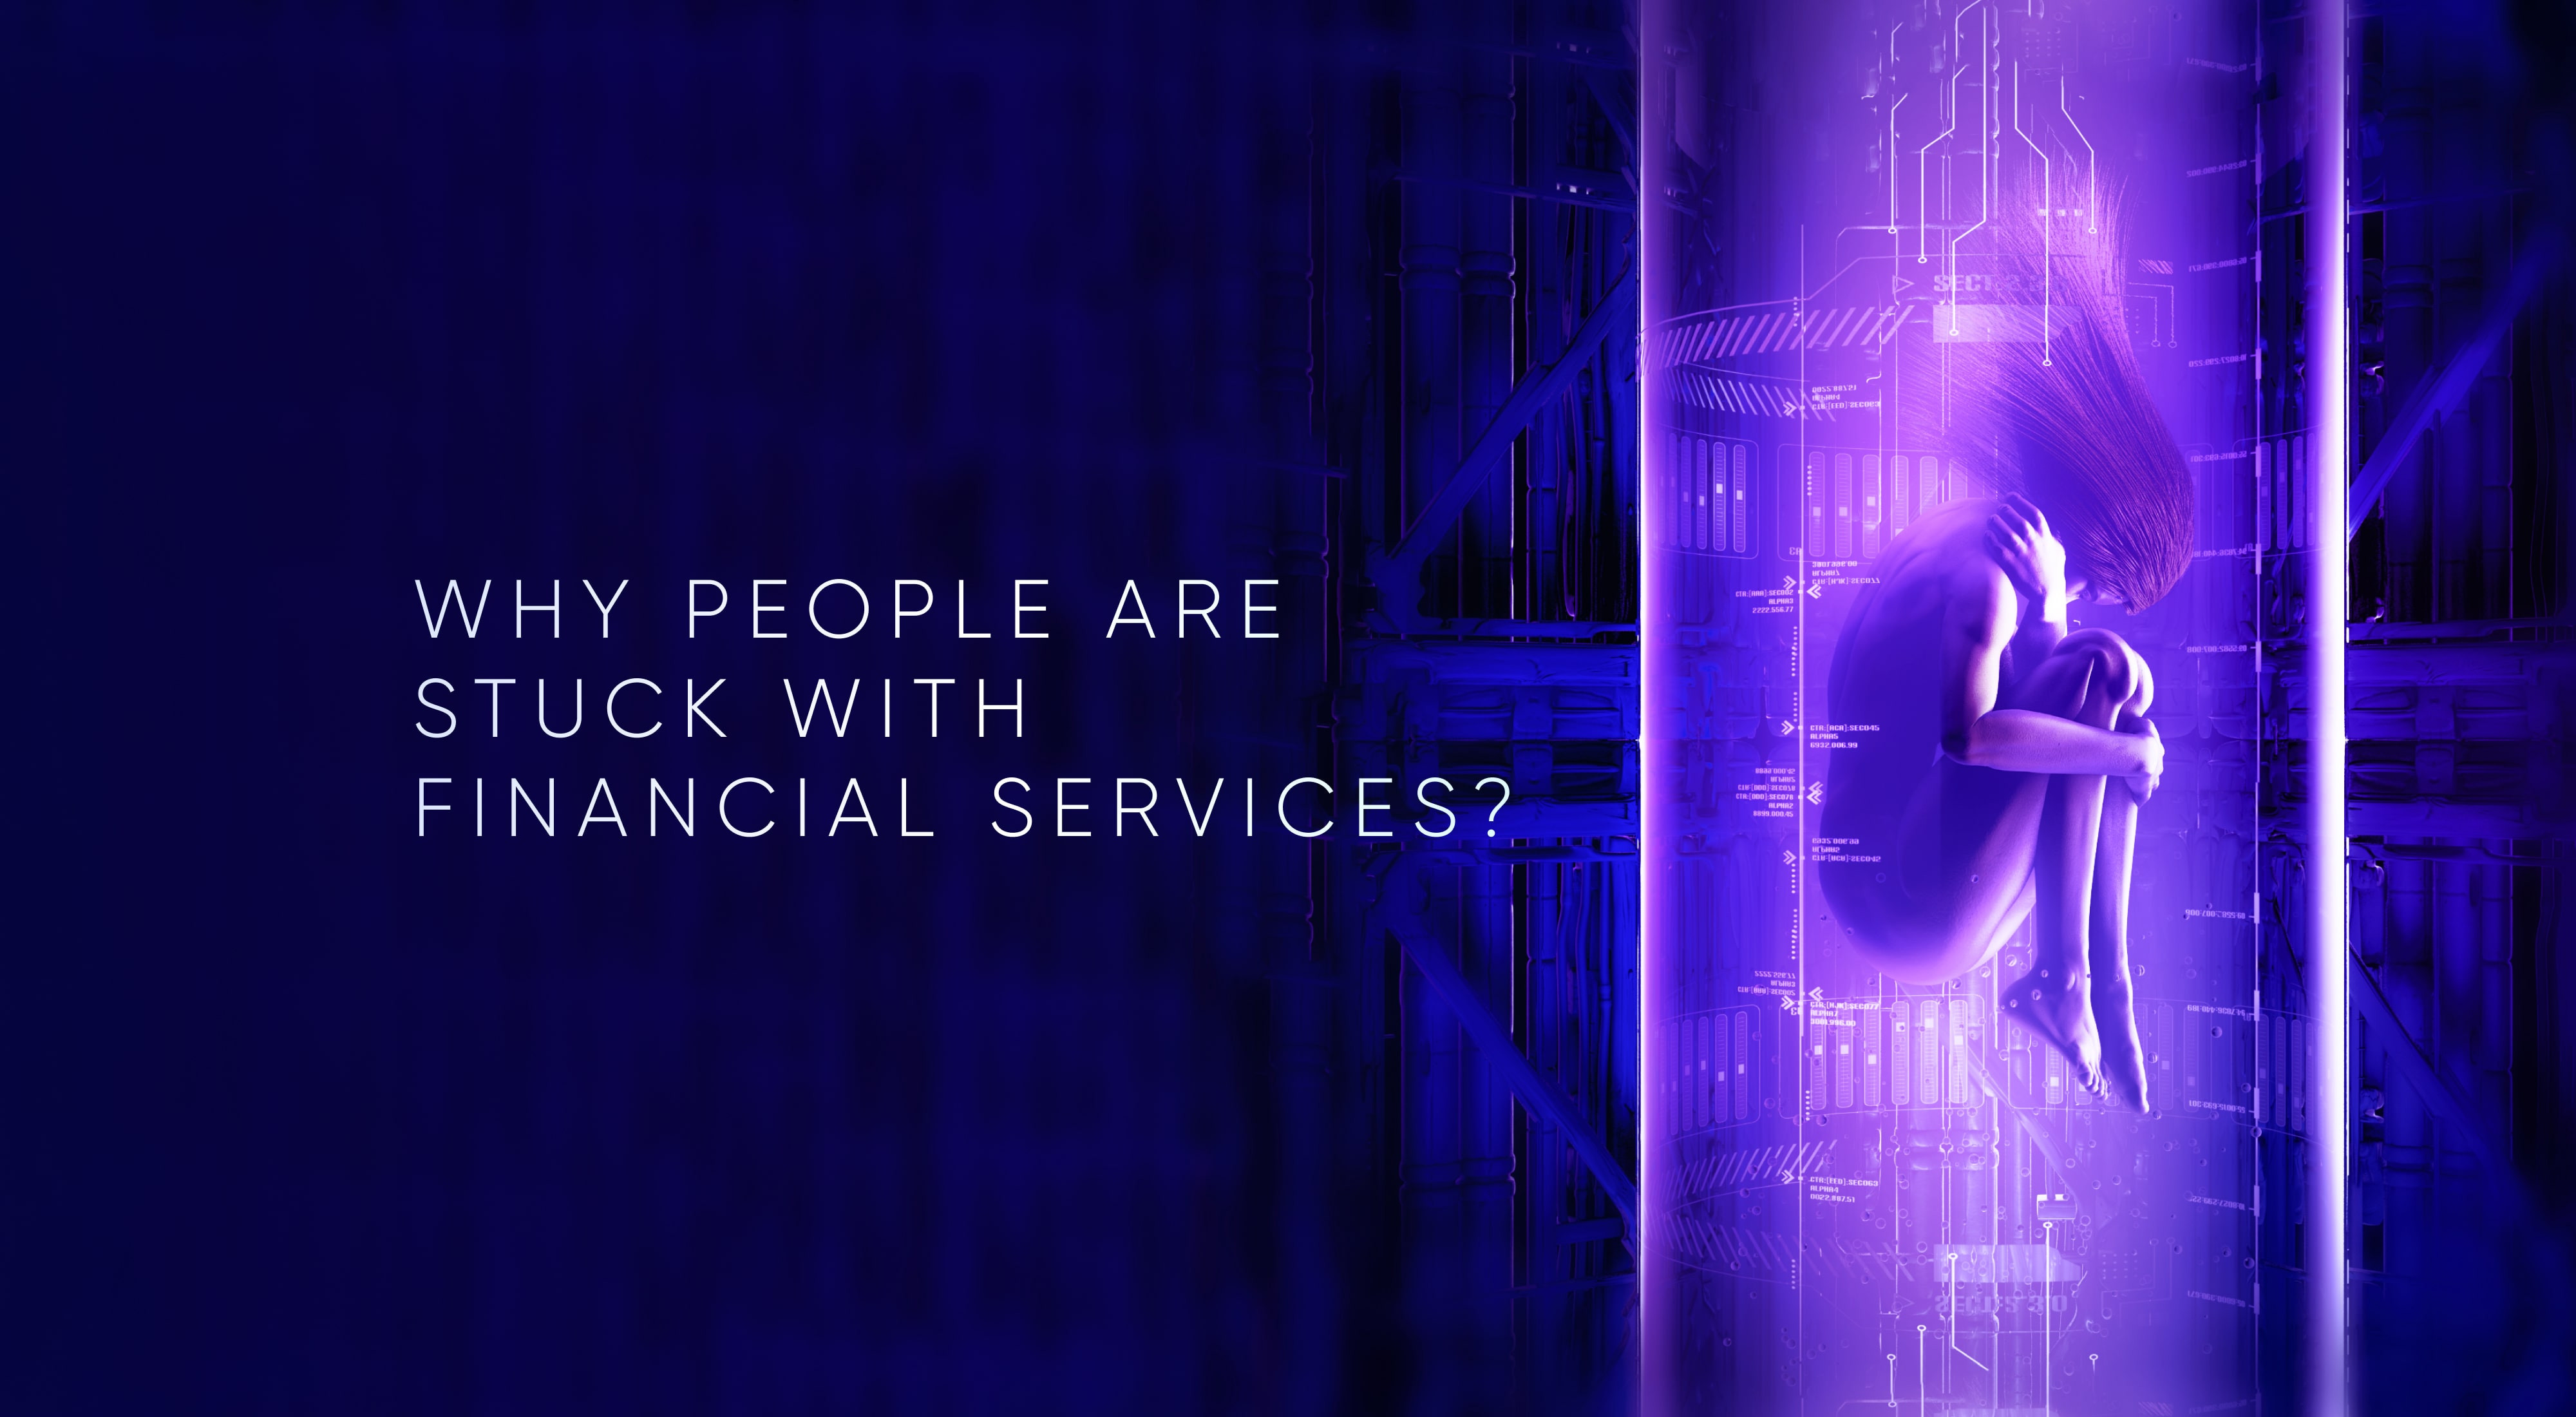 People are Stuck with Financial Services, but Banking Technology Could Help